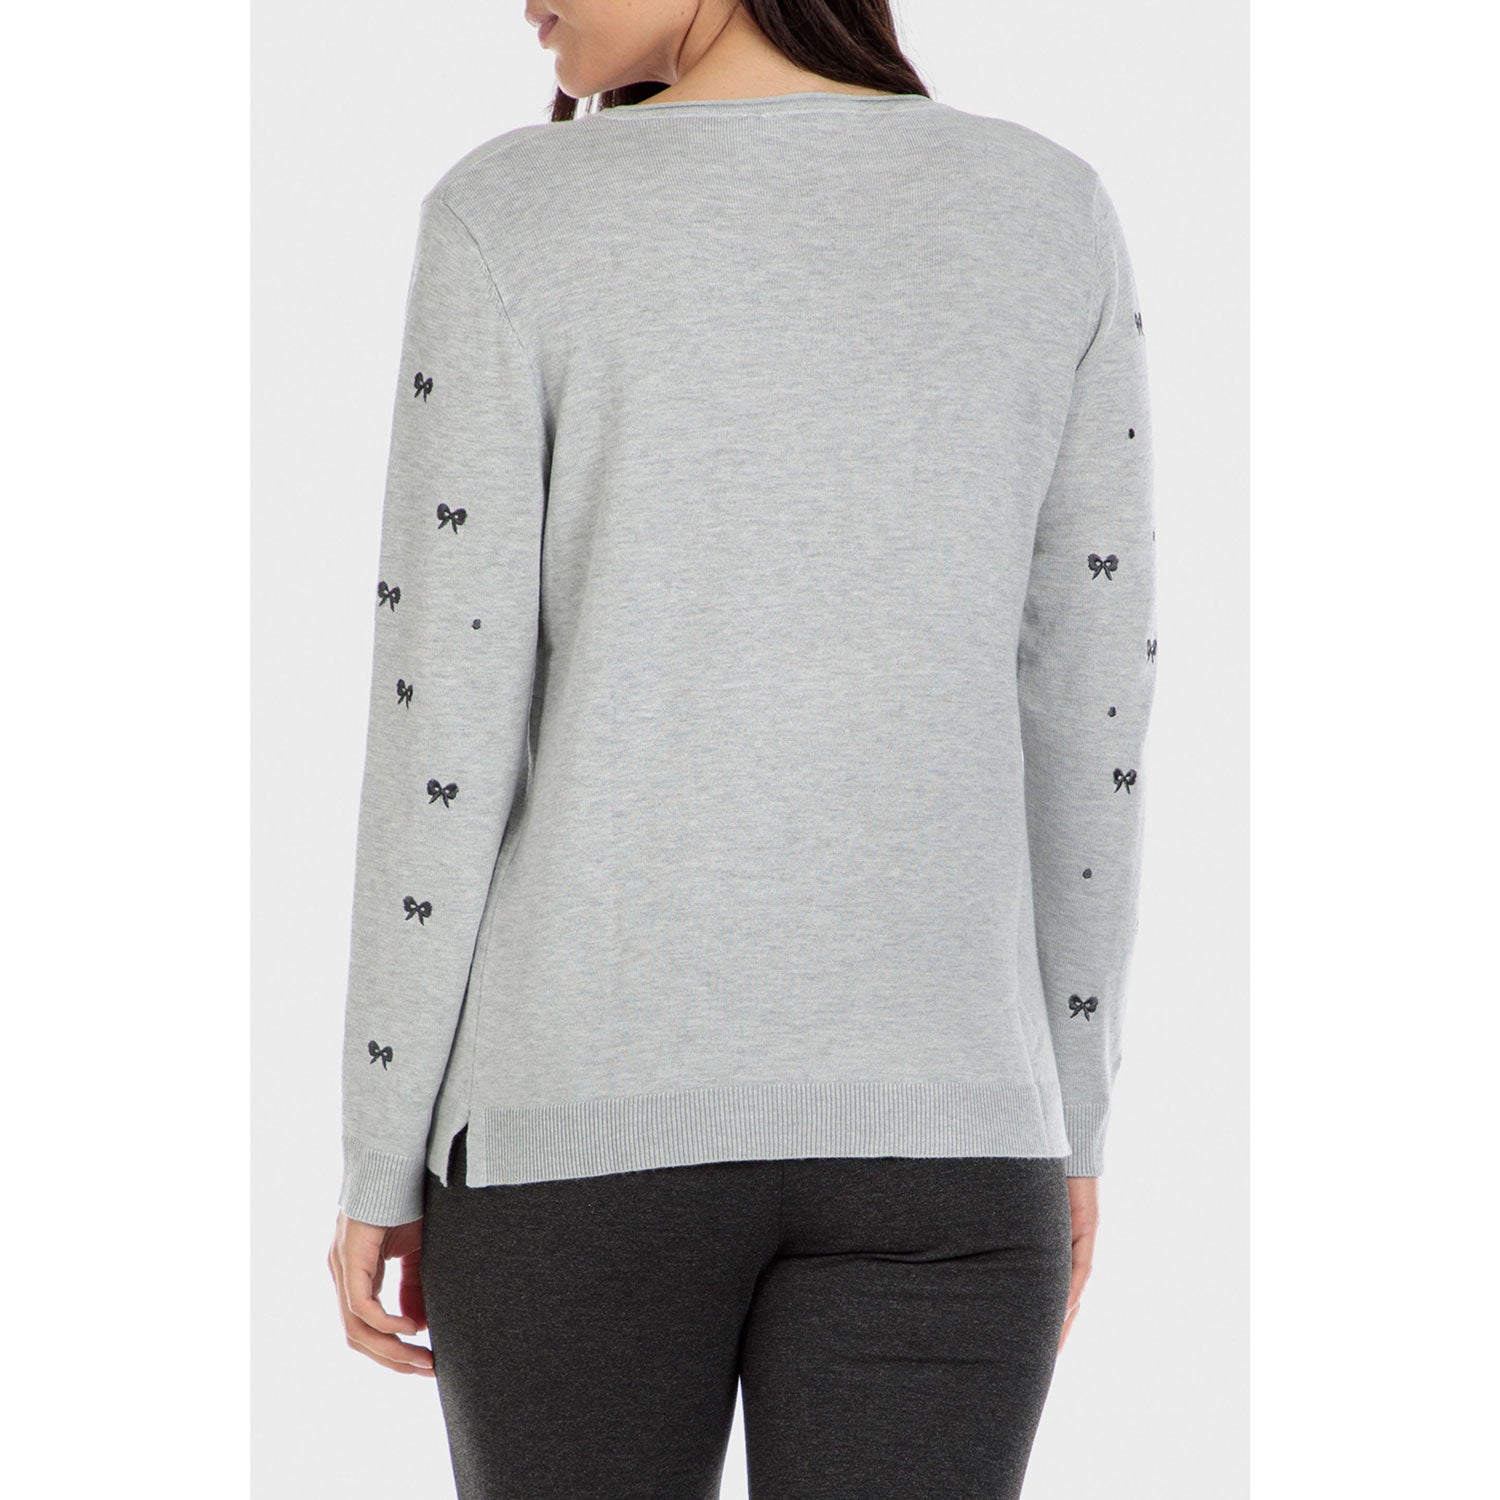 Punt Roma Rhinestone Embroidered Sweater - Grey 2 Shaws Department Stores